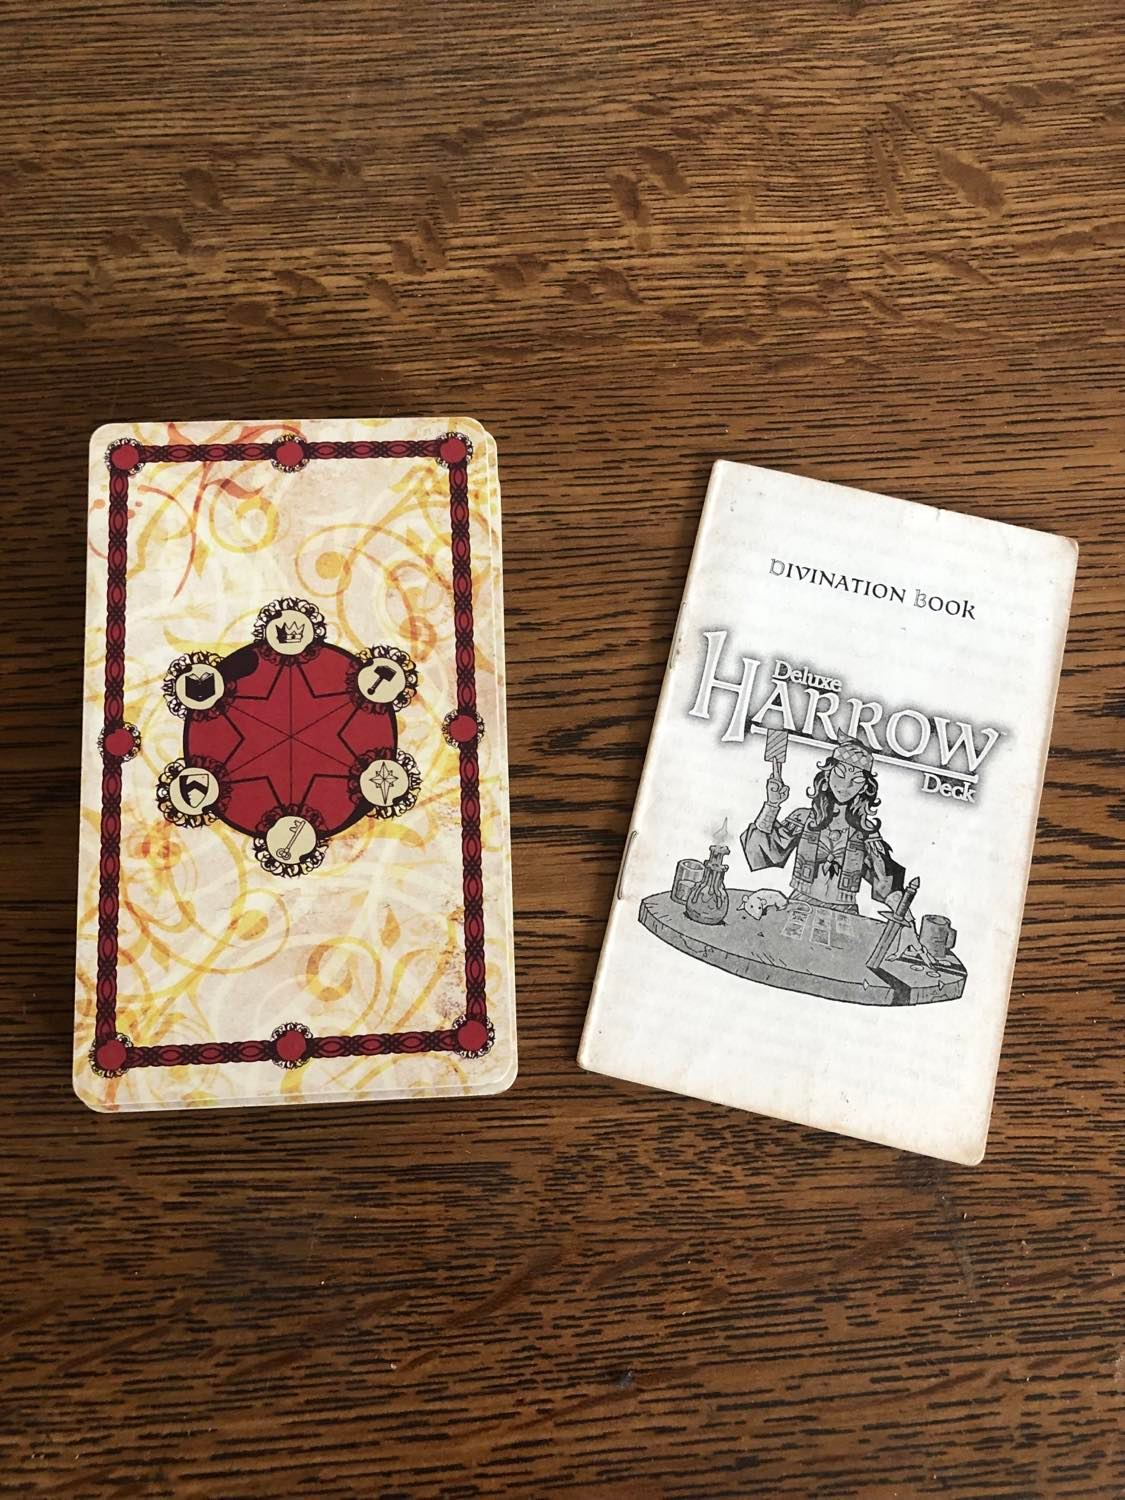 The Harrow deck cards and instruction manual beside, on a wooden desk.